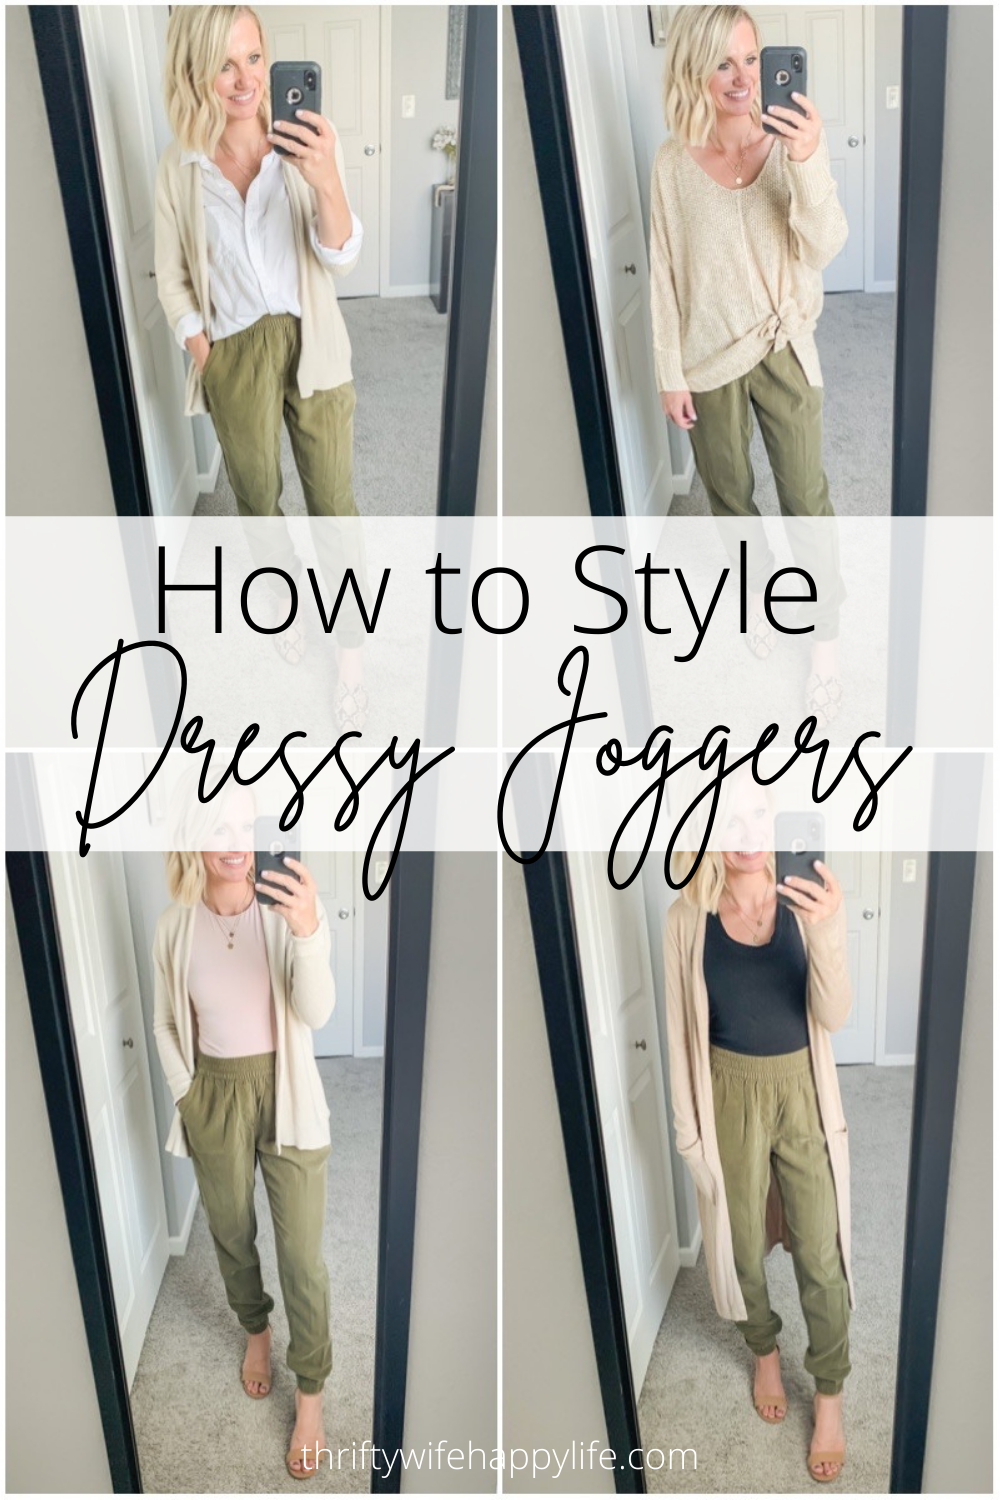 dressy jogger pants - Google Search  Jogger pants outfit dressy, Casual  outfit inspiration, Simple fall outfits